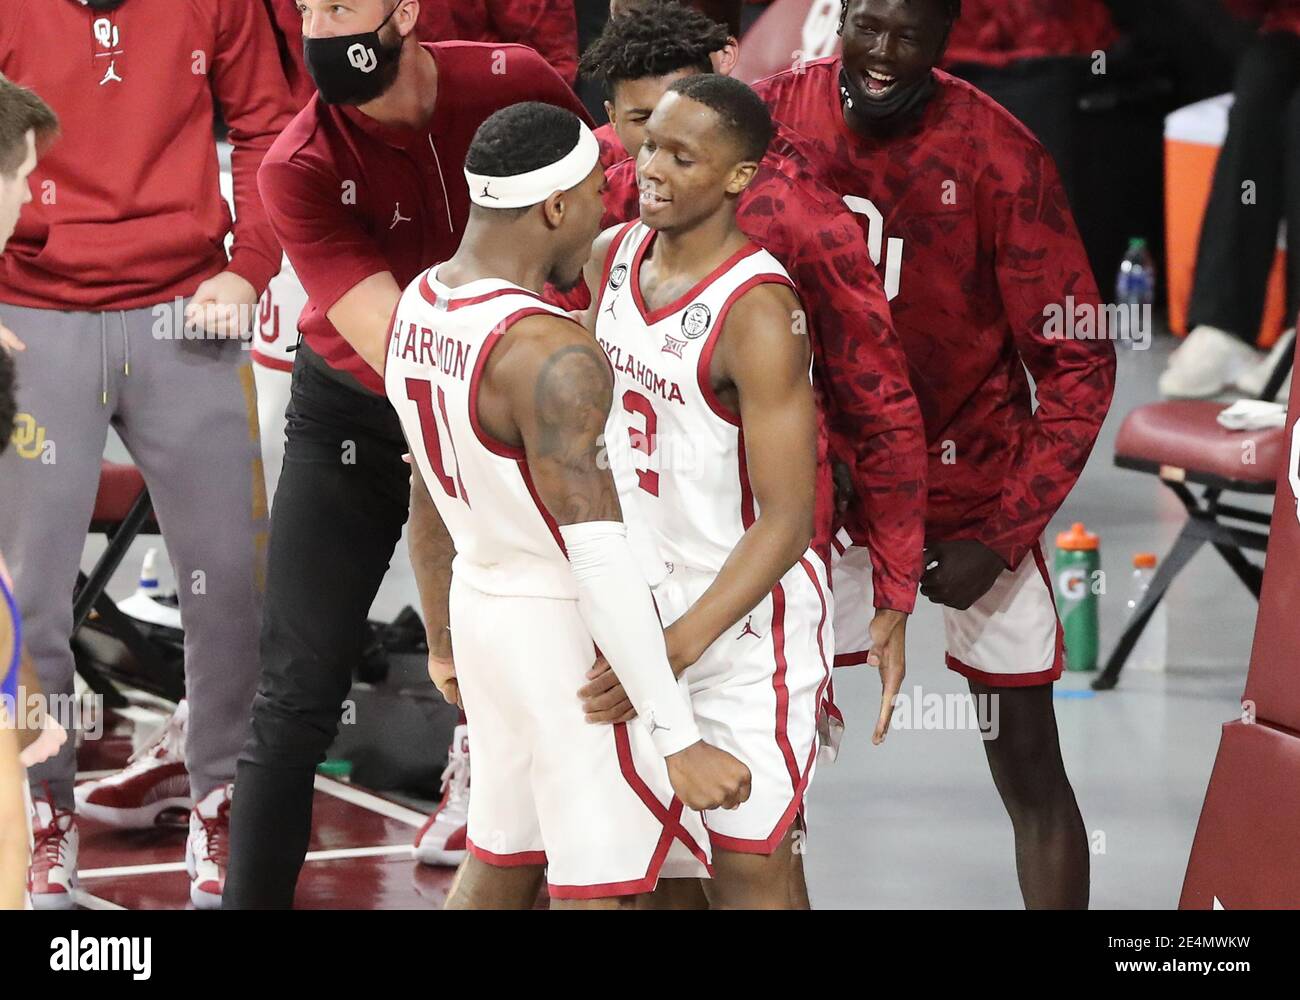 Norman, OK, USA. 23rd Jan, 2021. Oklahoma Sooners guard Umoja Gibson (2) is congratulated by teammate De'Vion Harmon (11) during a basketball game between the Kansas Jayhawks and Oklahoma Sooners at Lloyd Noble Center in Norman, OK. Gray Siegel/CSM/Alamy Live News Stock Photo